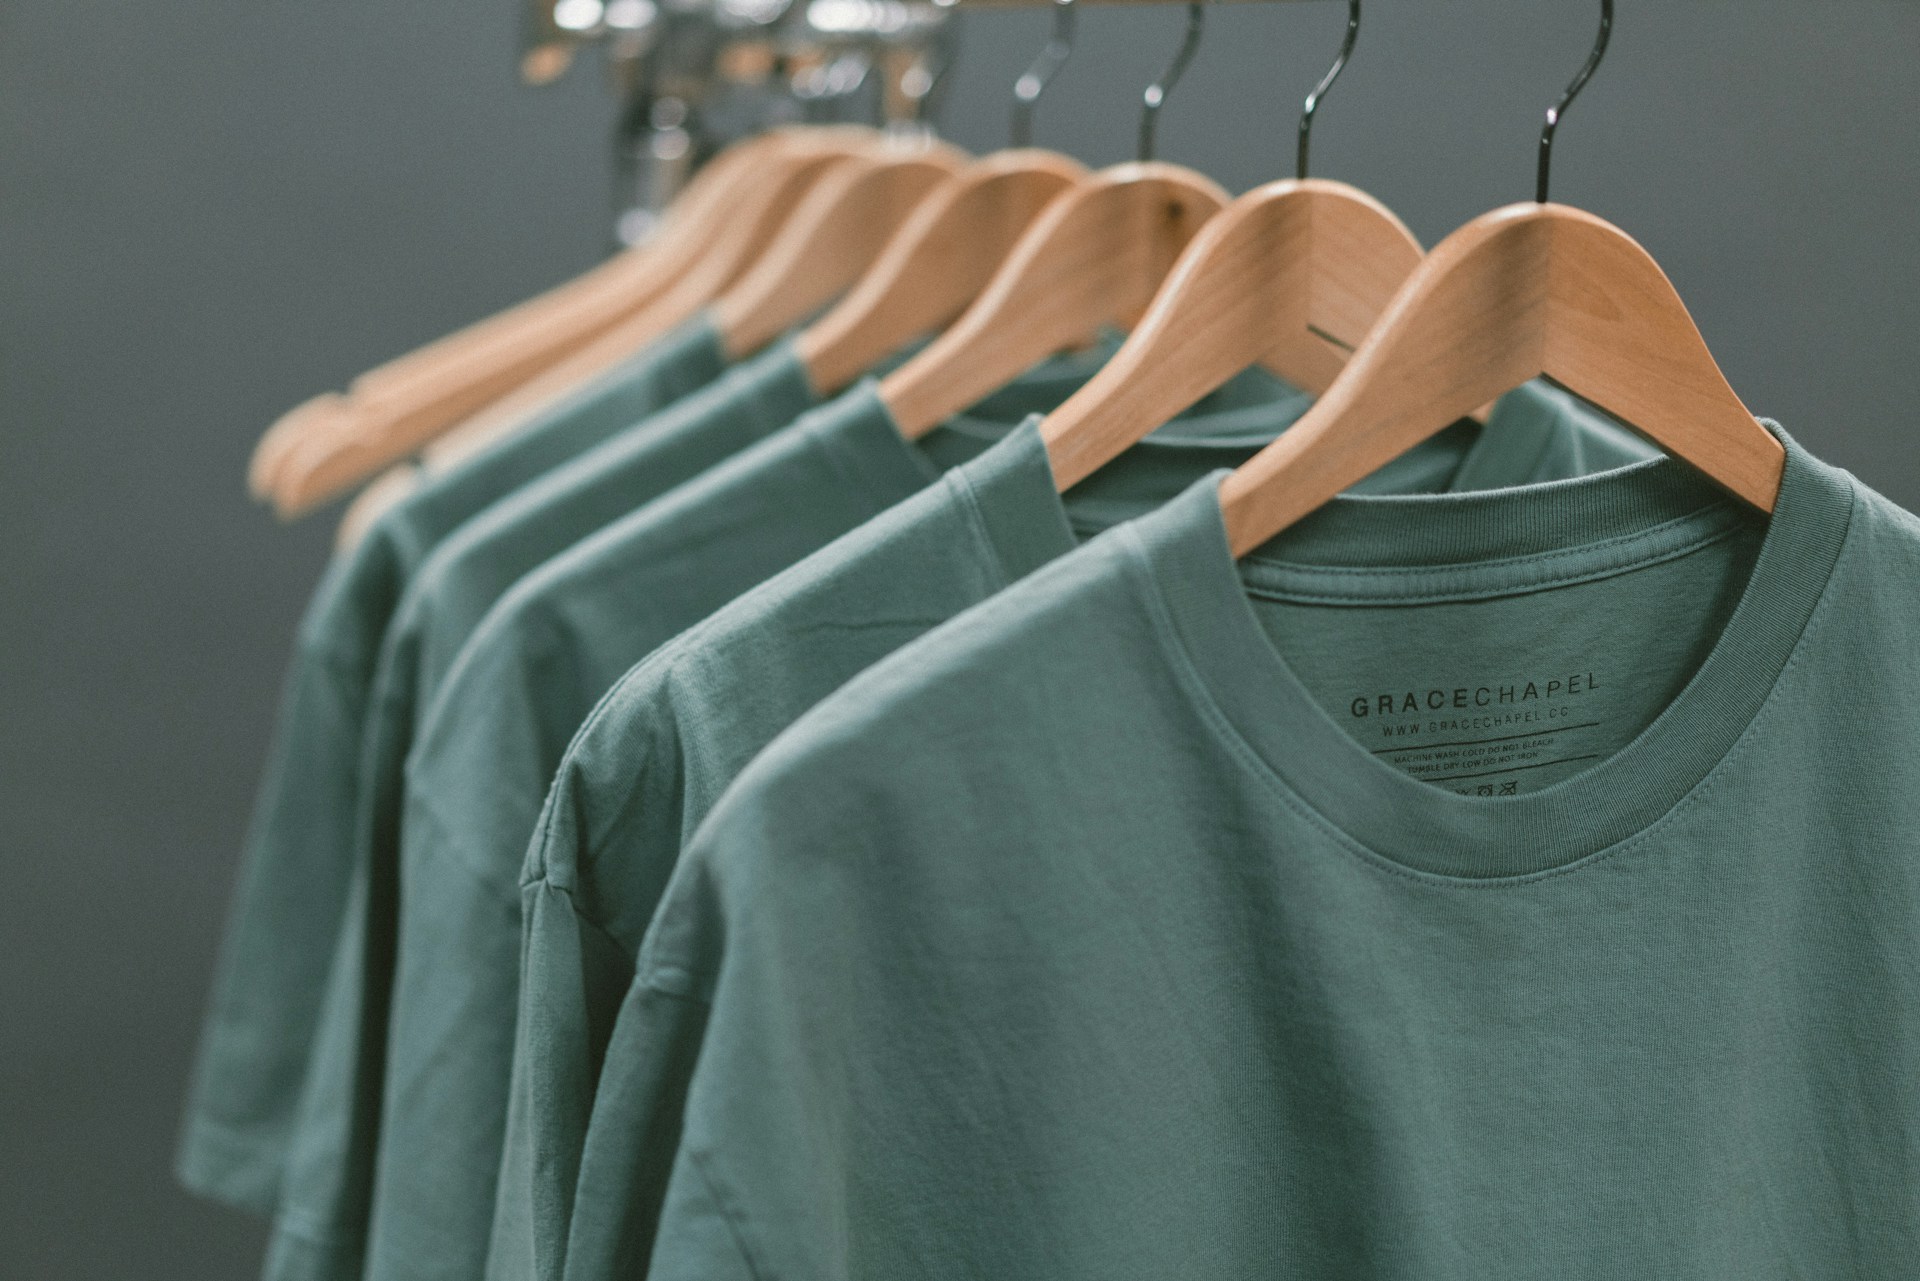 Dark seagreen t-Shirts on hangers in front of a grey background.